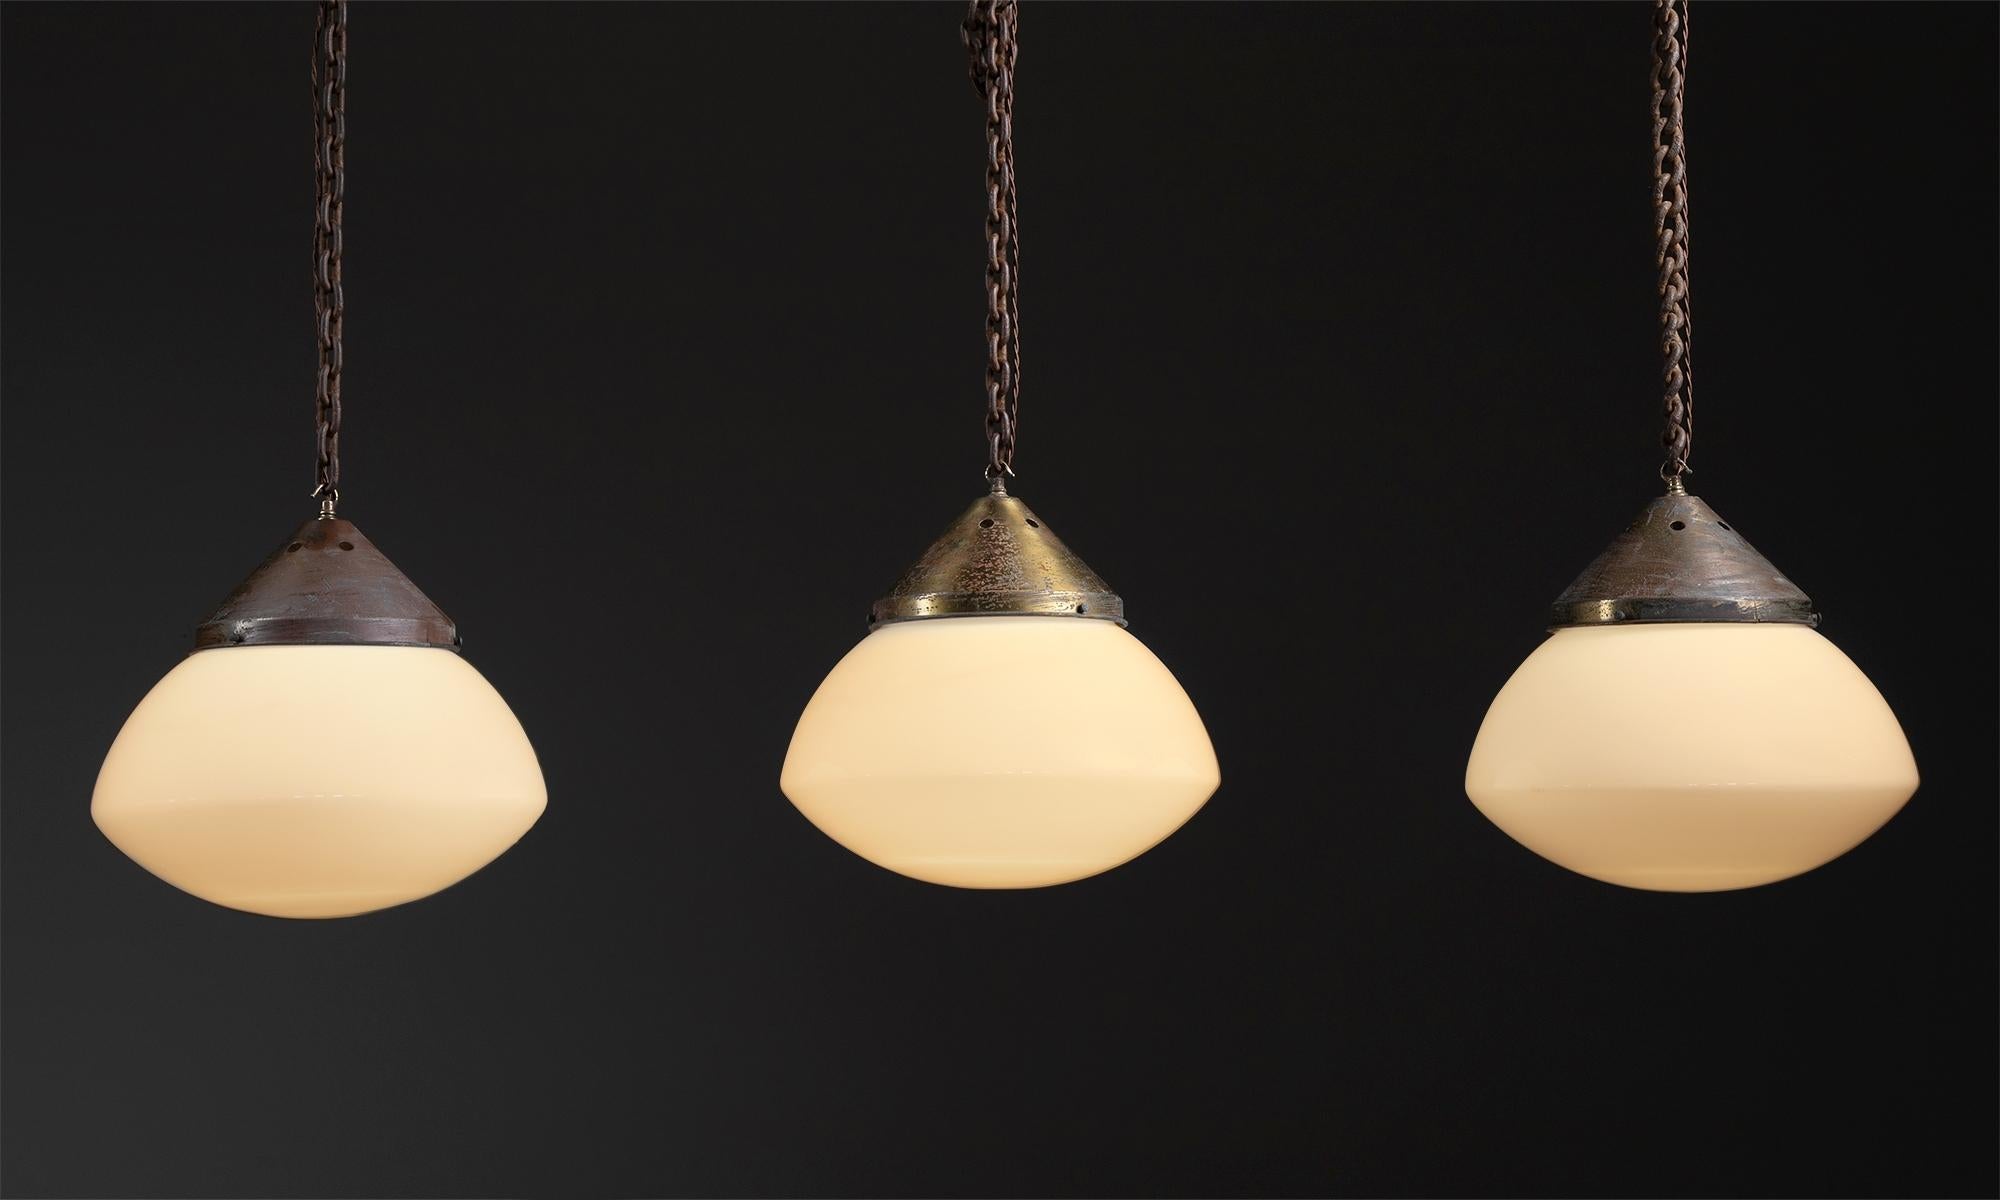 Massive opaline pendants.

England, circa 1930.

Ovaloid glass shade with original brass gallery. *Chain and Canopy not Included*

Measures: 17”diameter x 17.5”height.